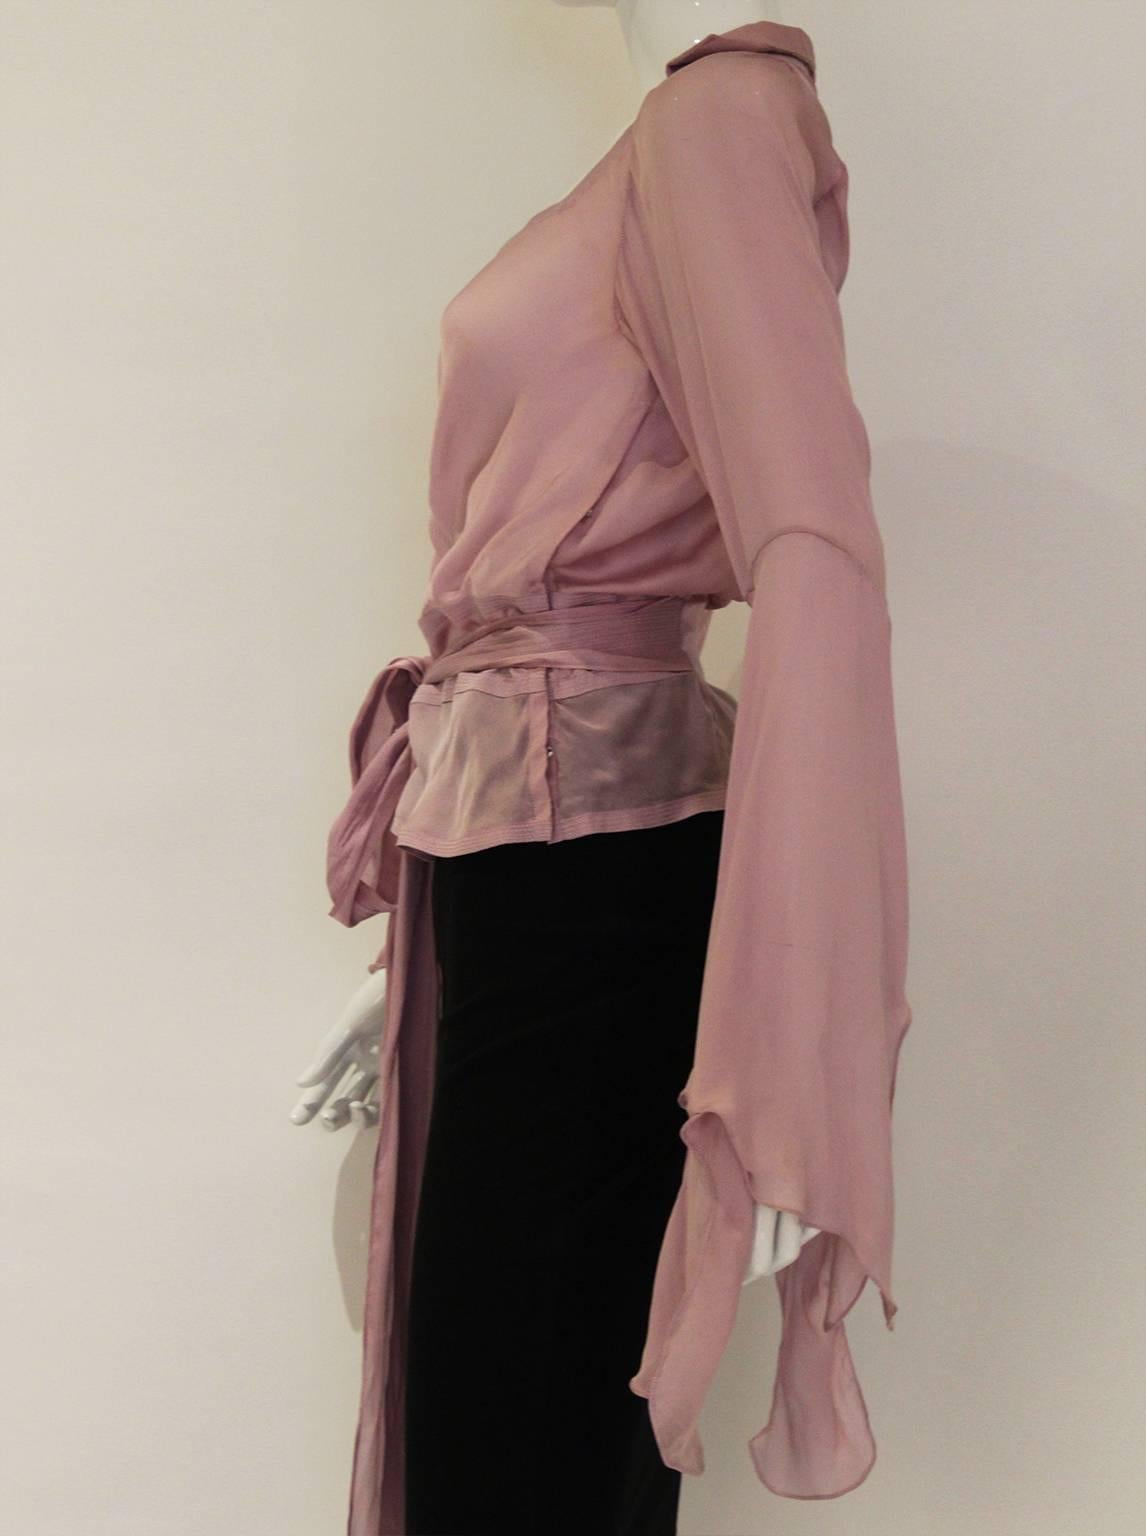 A beautiful blouse by Yves Saint Laurent, Rive Gauche, in fine lavender colour silk. This blouse has a sweetheart neckline with gathering detail and long sleeves with wonderful waterfall effect from the elbow. It also has a long tie belt that goes